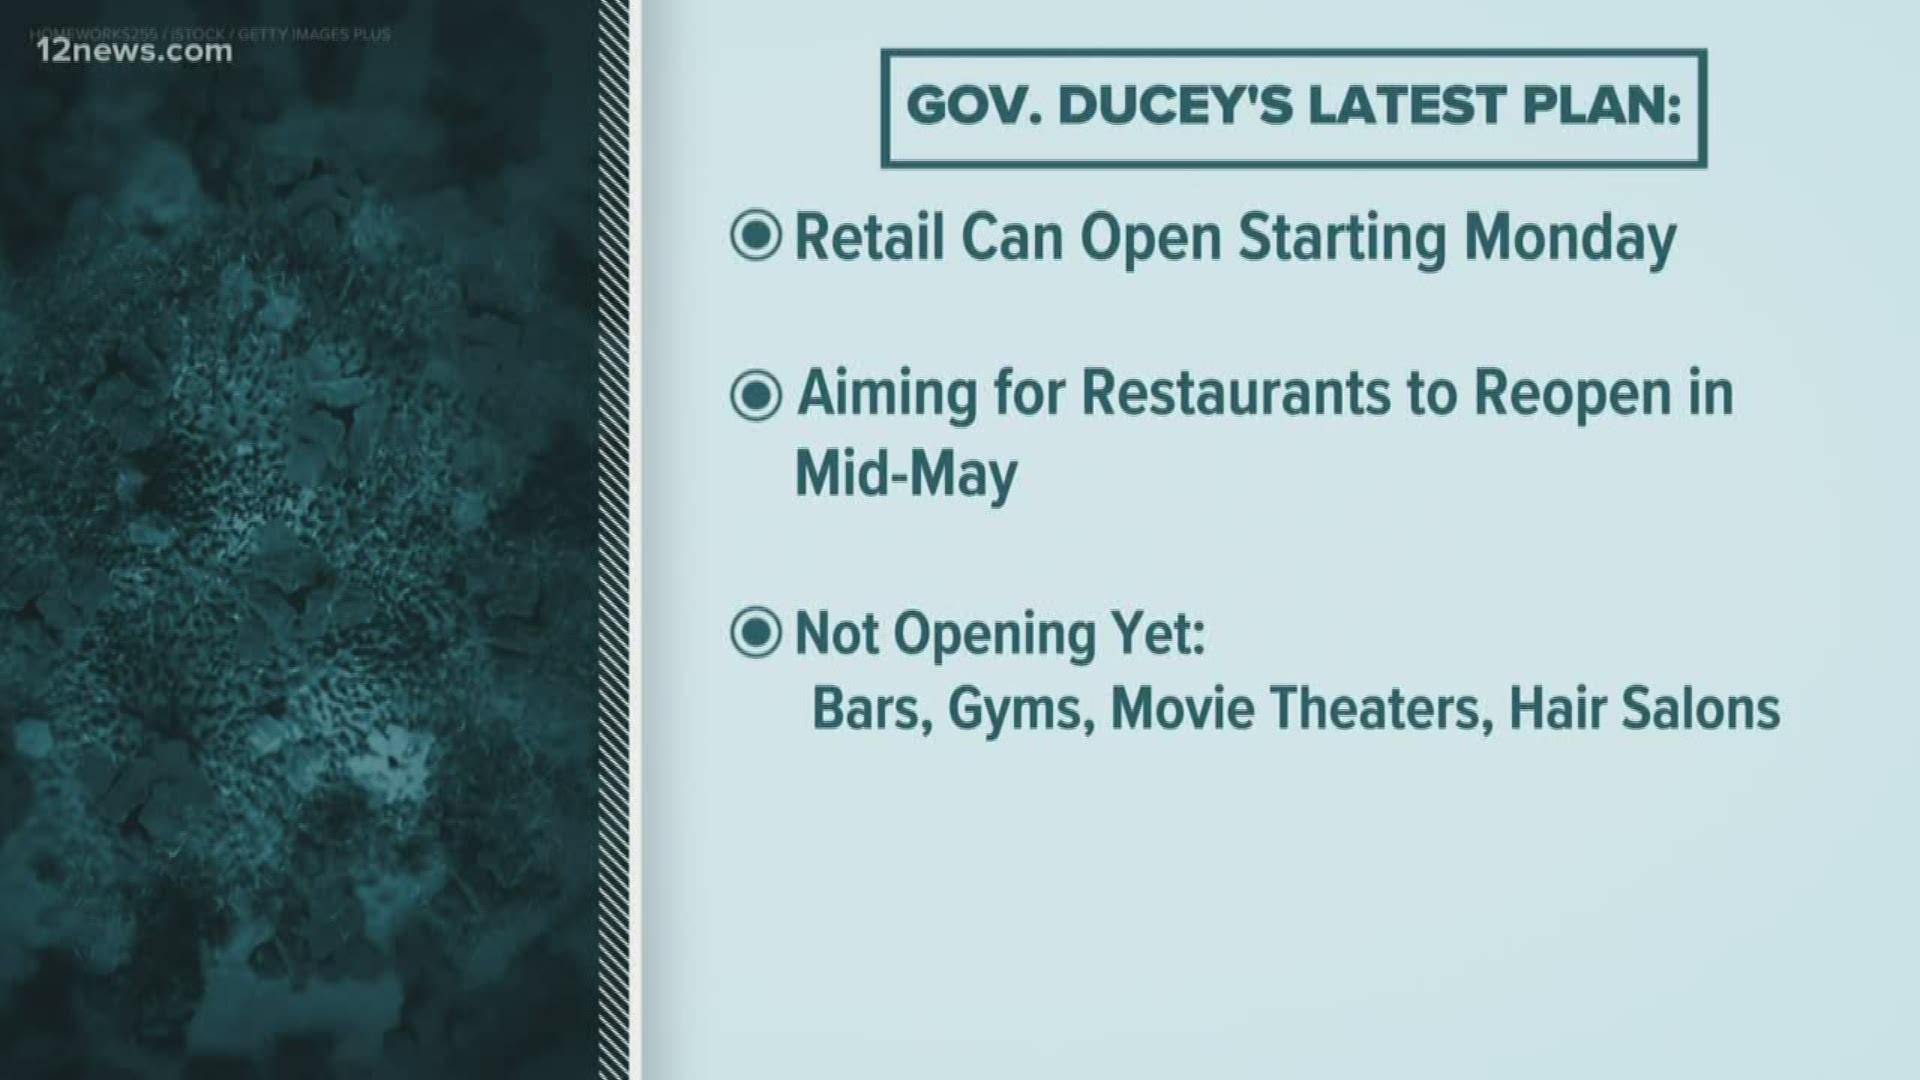 Gov. Ducey has modified his stay-at-home order that expires at midnight Thursday. He's extending it till May 15th, allowing some small businesses to open.